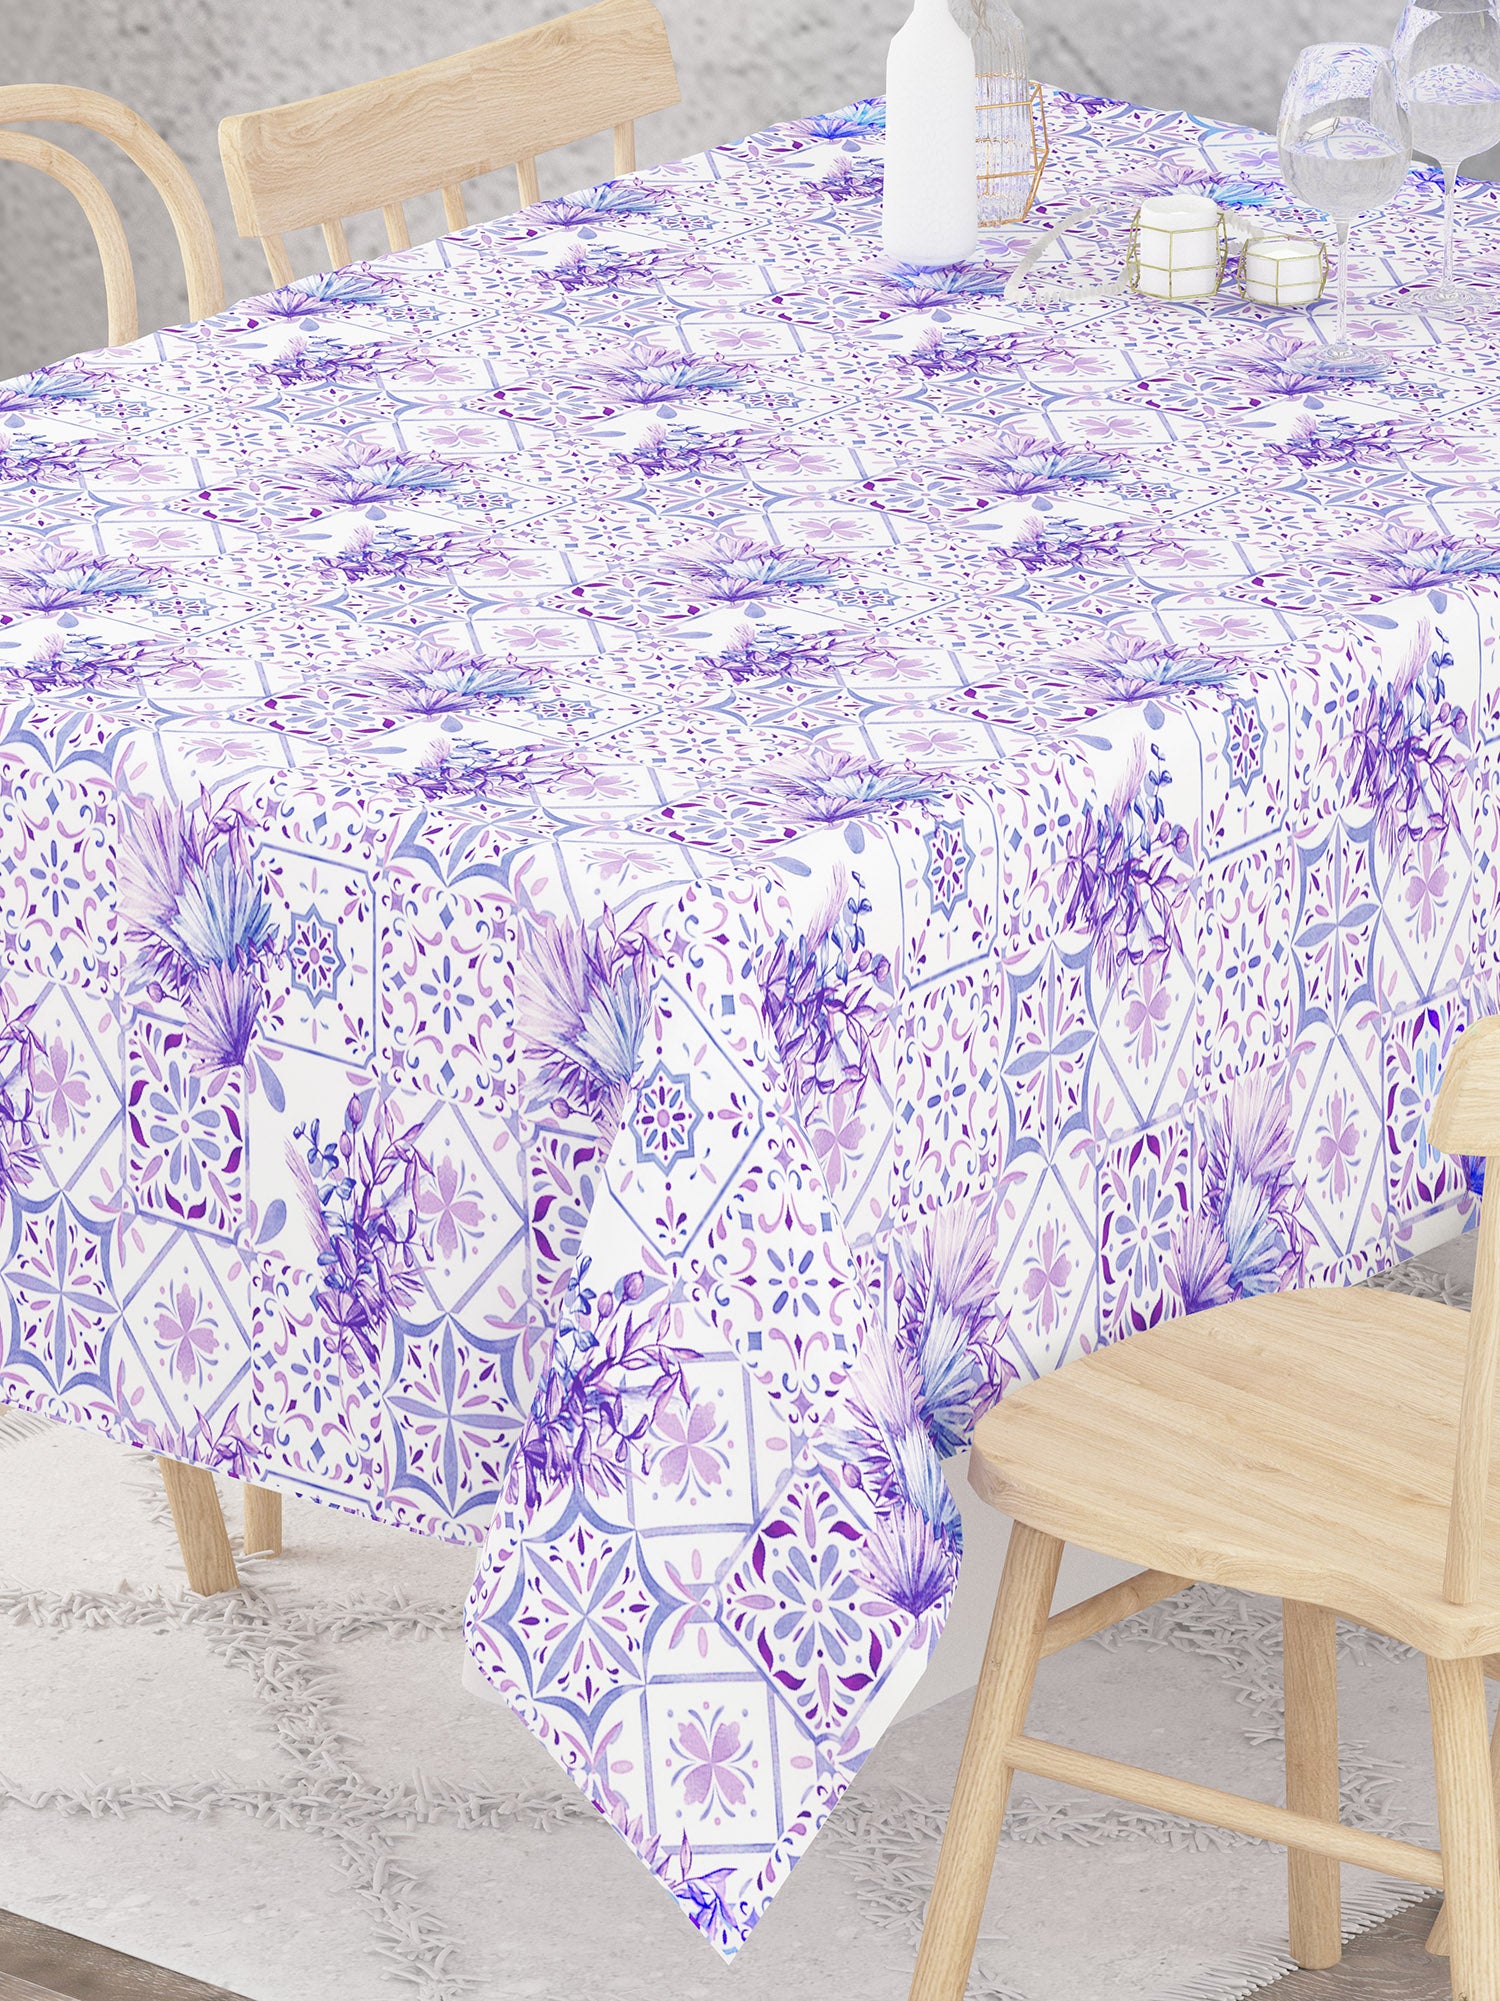 Floral Print White and Purple Table Cover